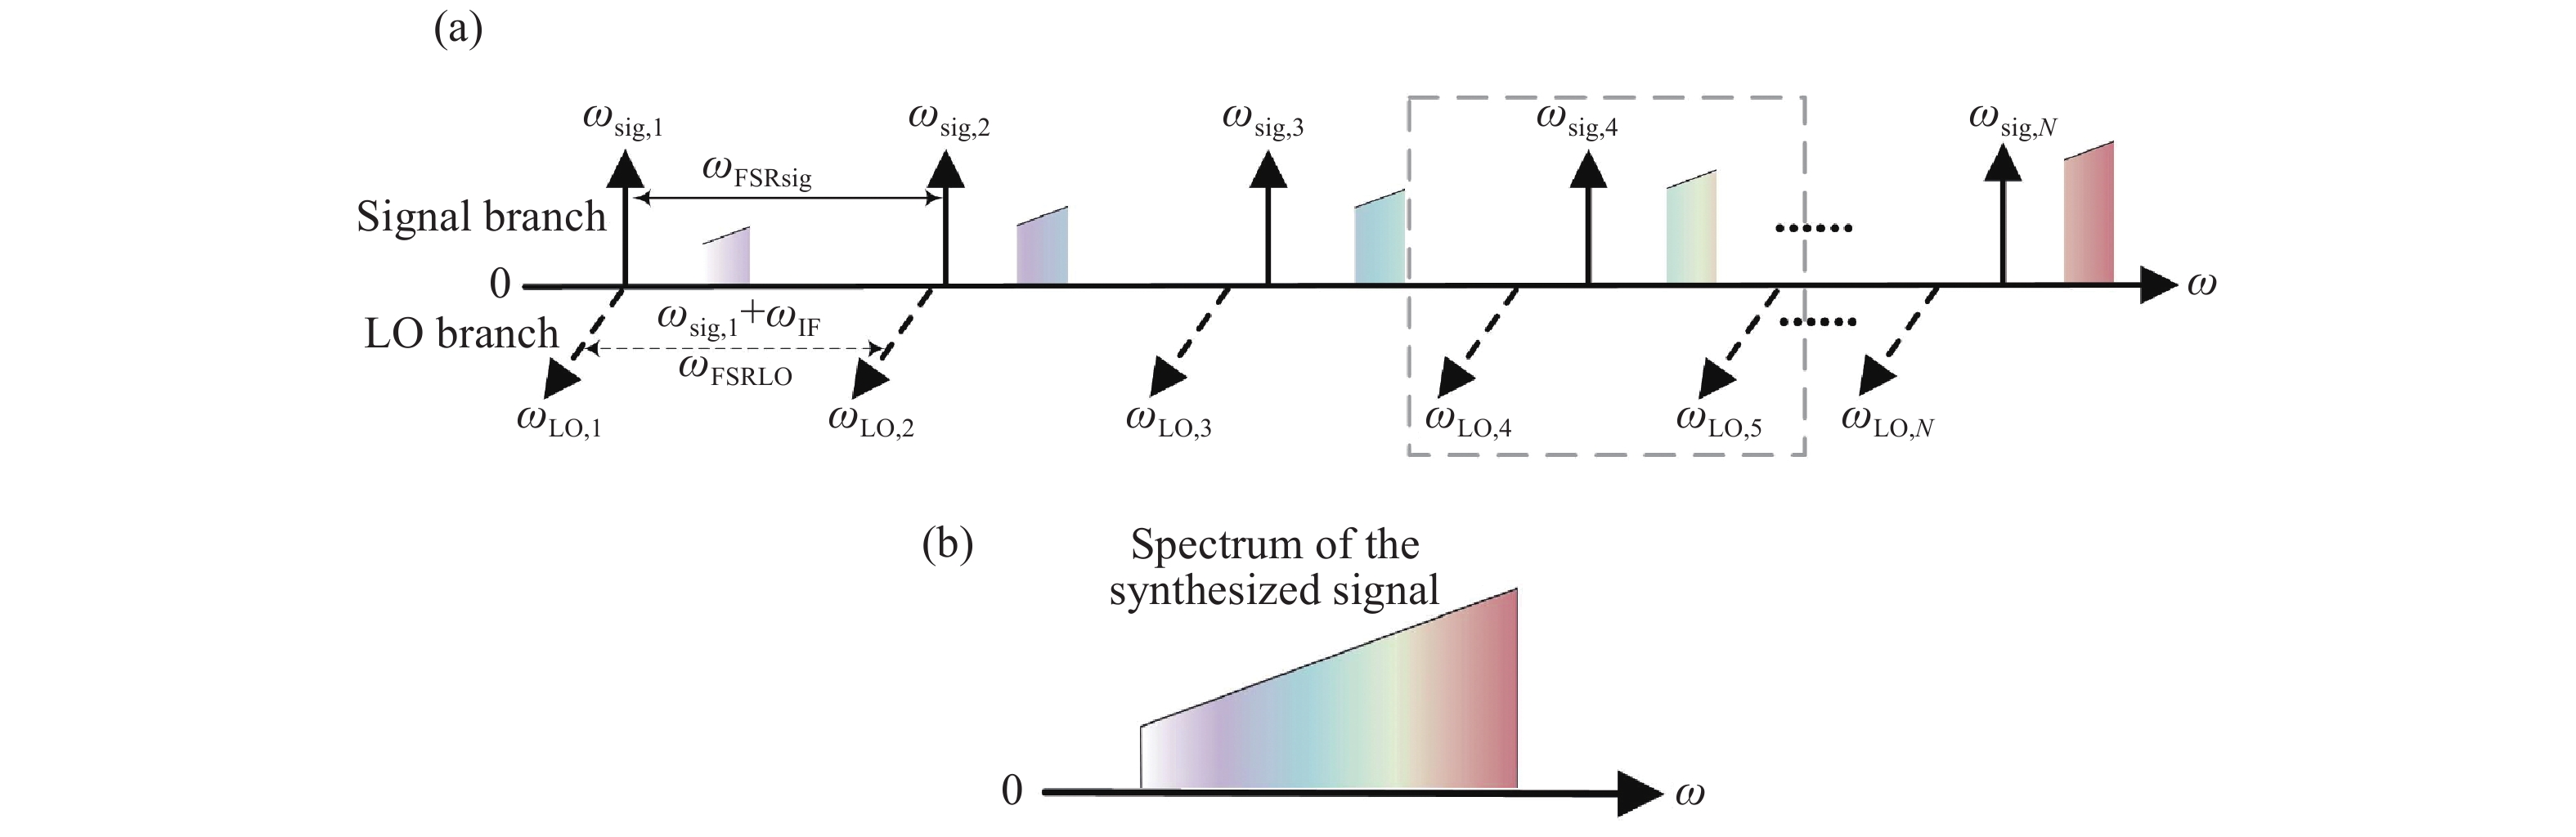 Principle of the channelized synthesis system. (a) Principle of the two branches; (b) Principle of the spectrum stitching of the synthesized signal